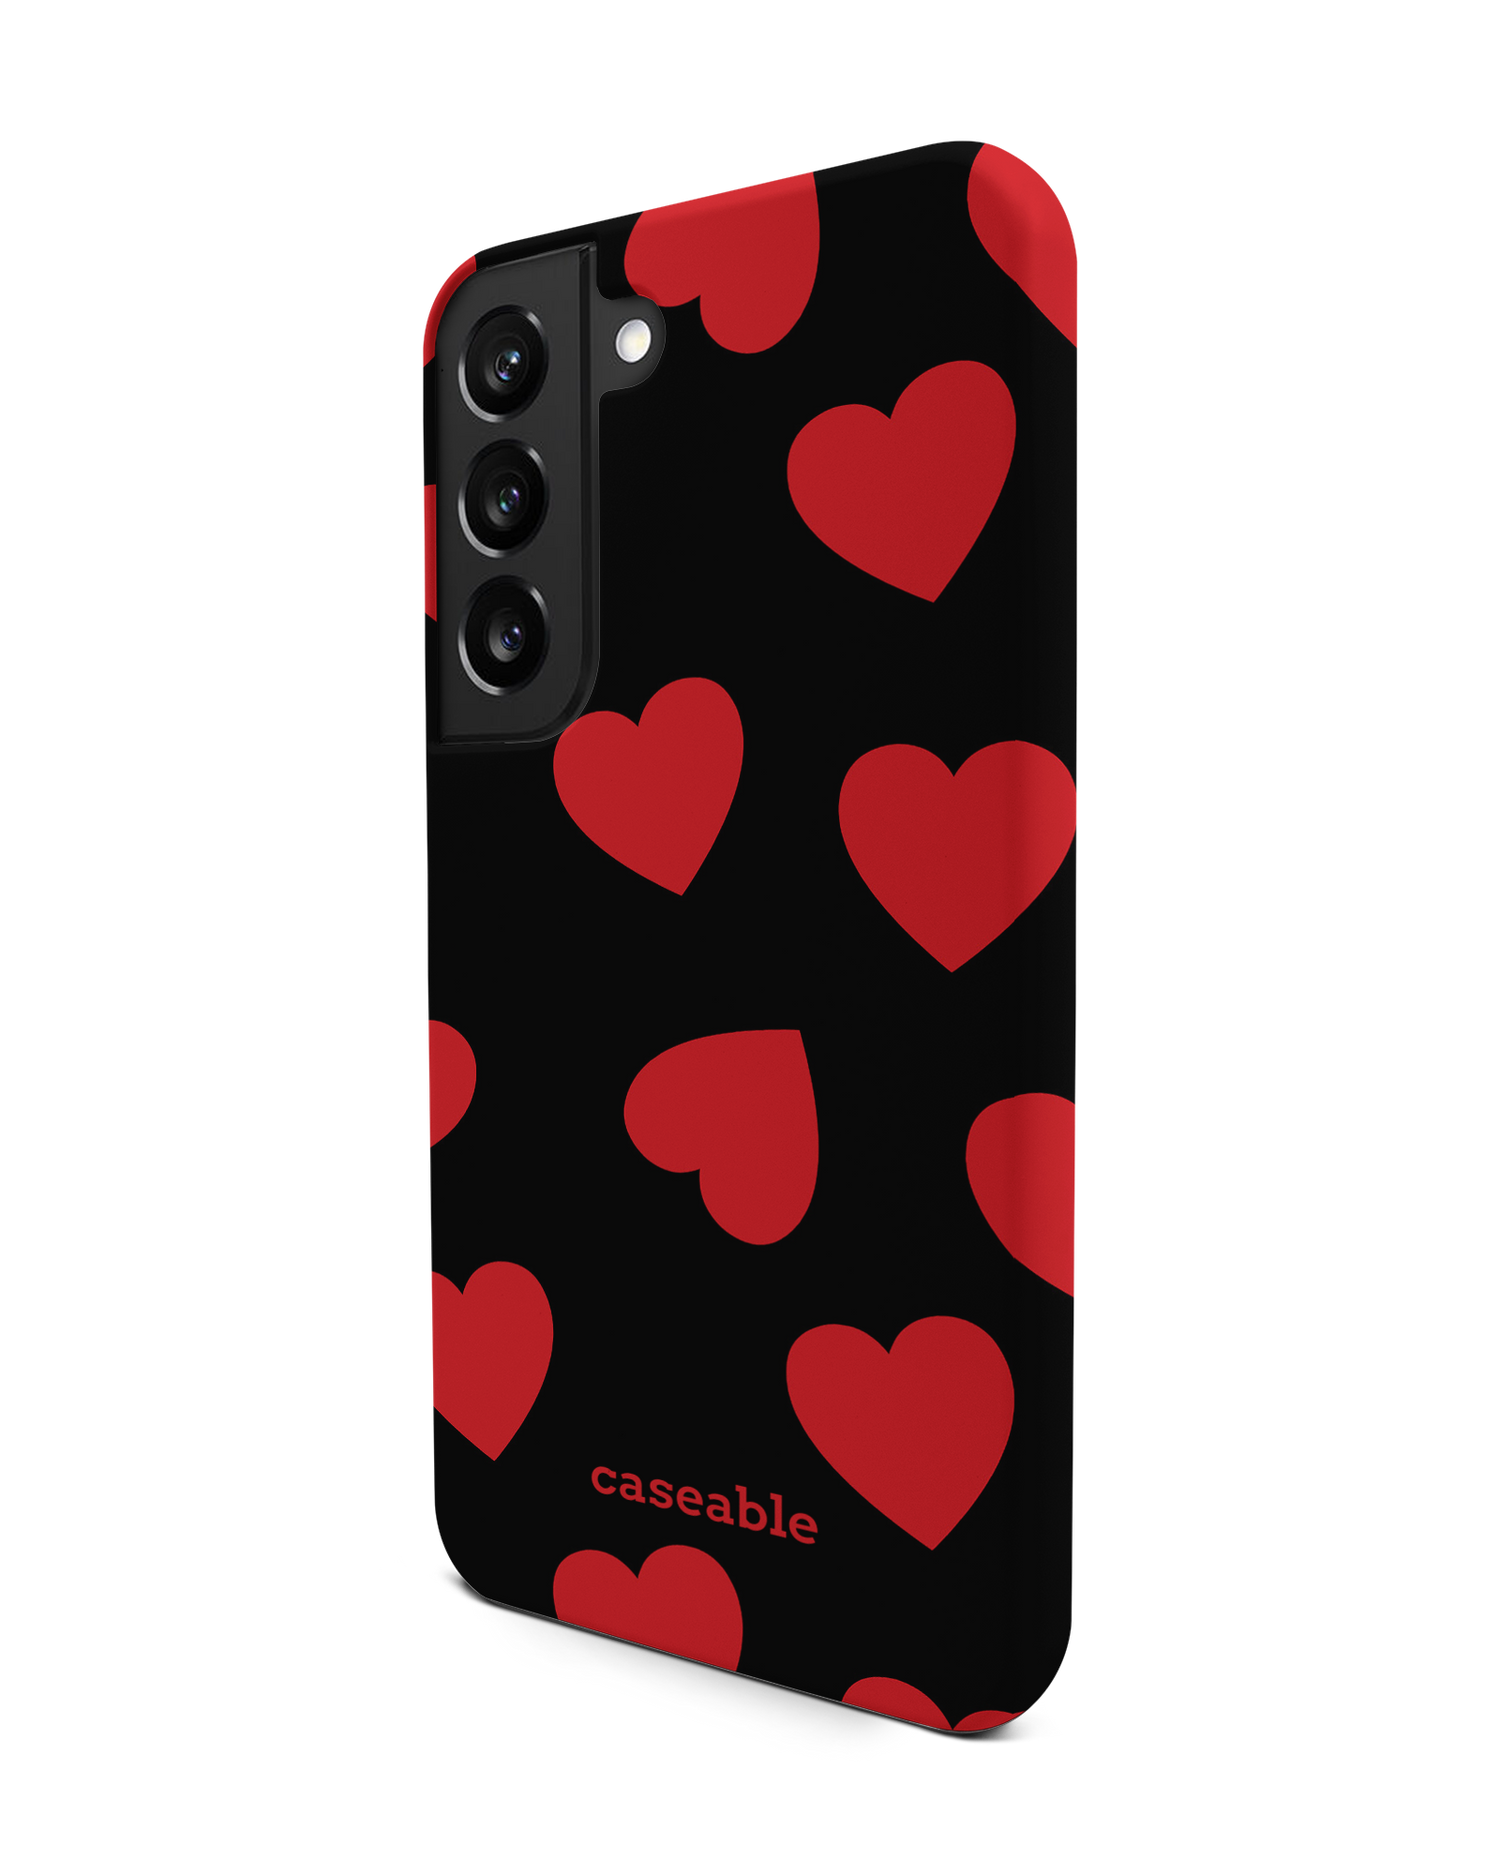 Repeating Hearts Premium Phone Case Samsung Galaxy S22 5G: View from the right side